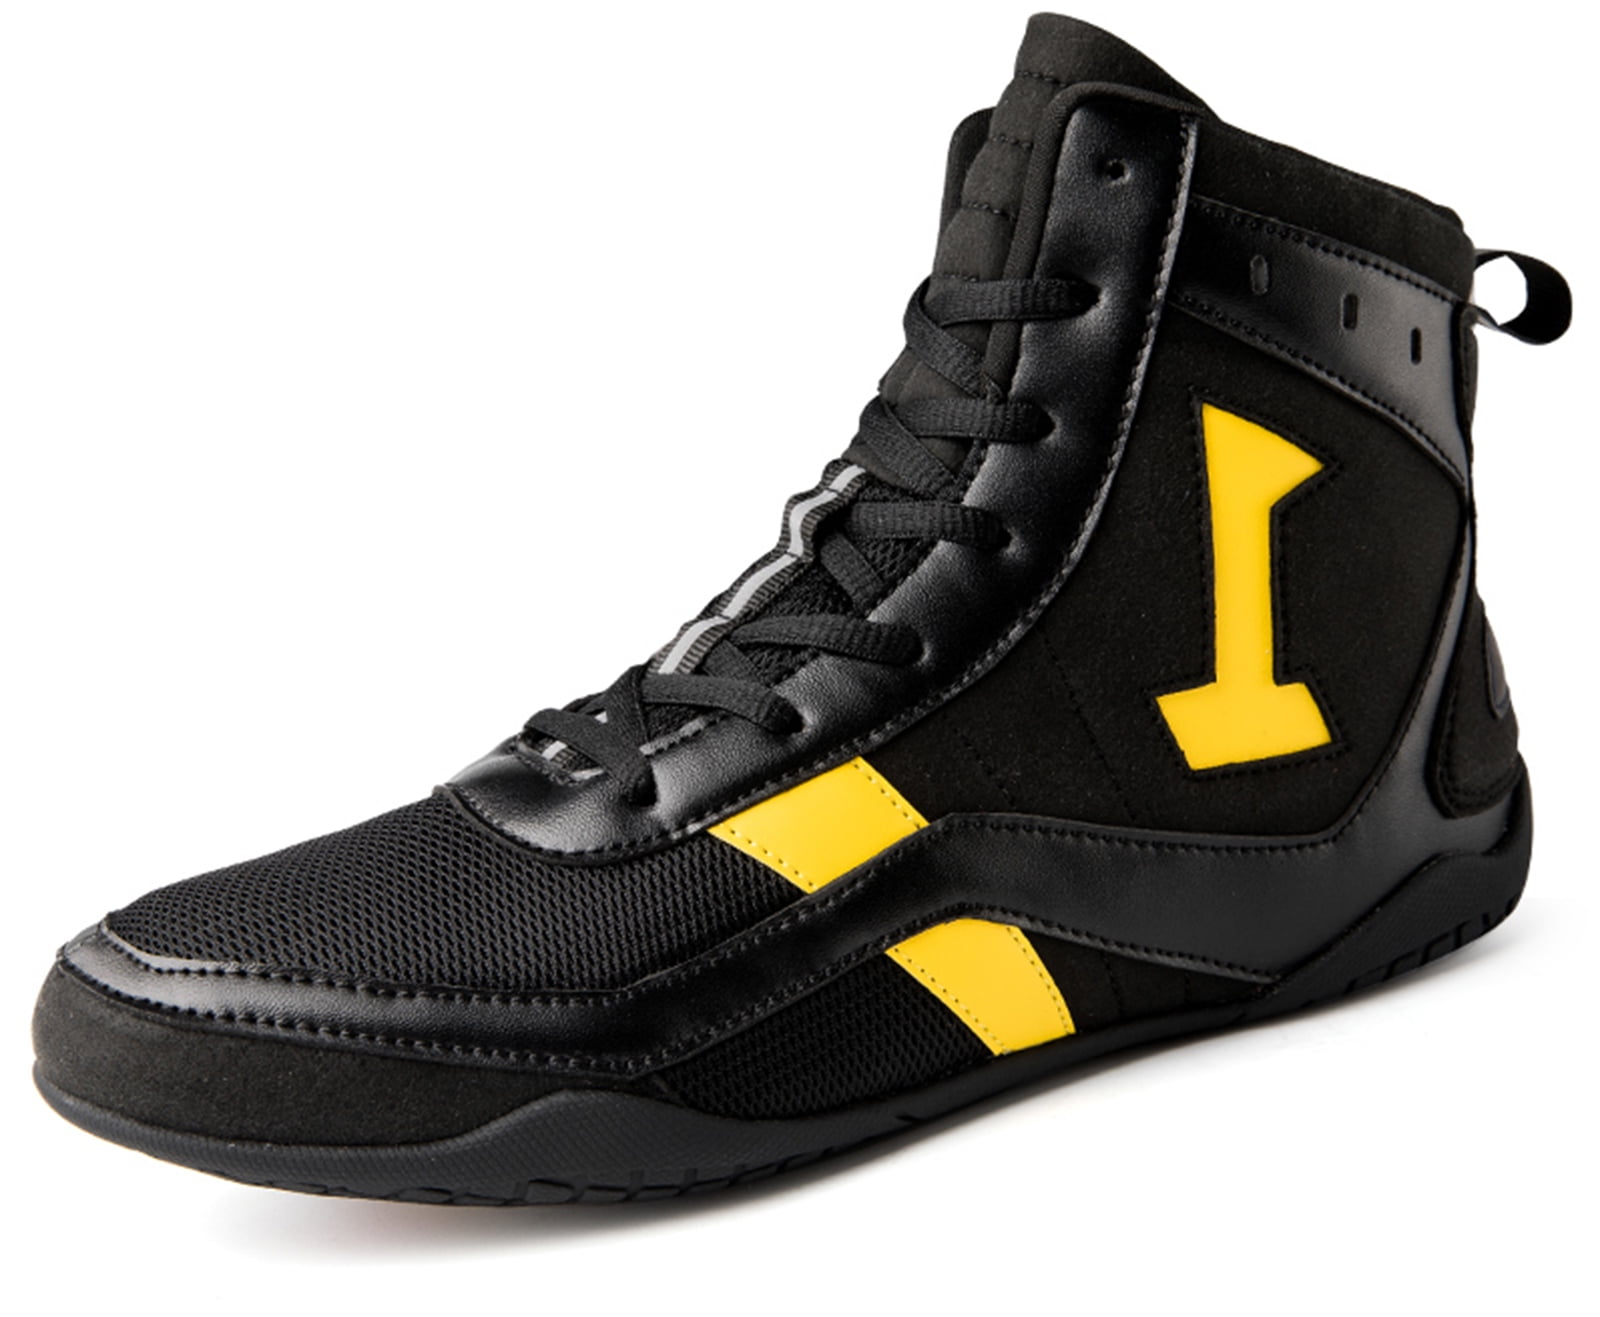 Unisex Wrestling Shoes for Men Women Boxing Shoes Youth Kick Fighting ...